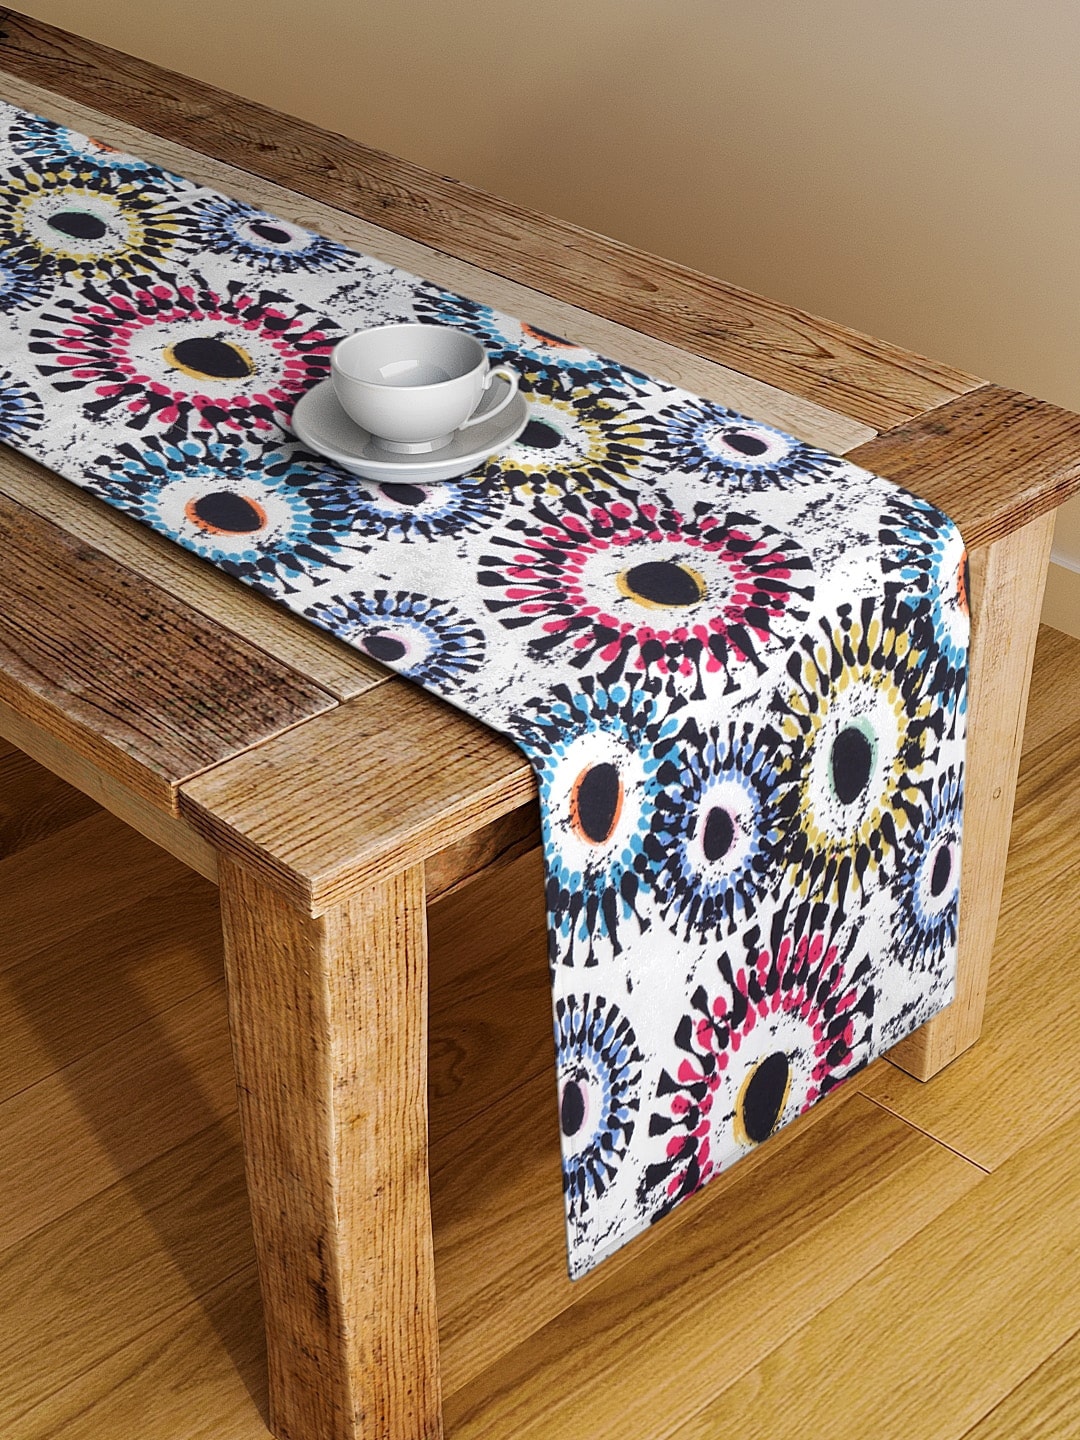 Alina decor Blue & Black Abstract Digital Printed Table Runner Price in India